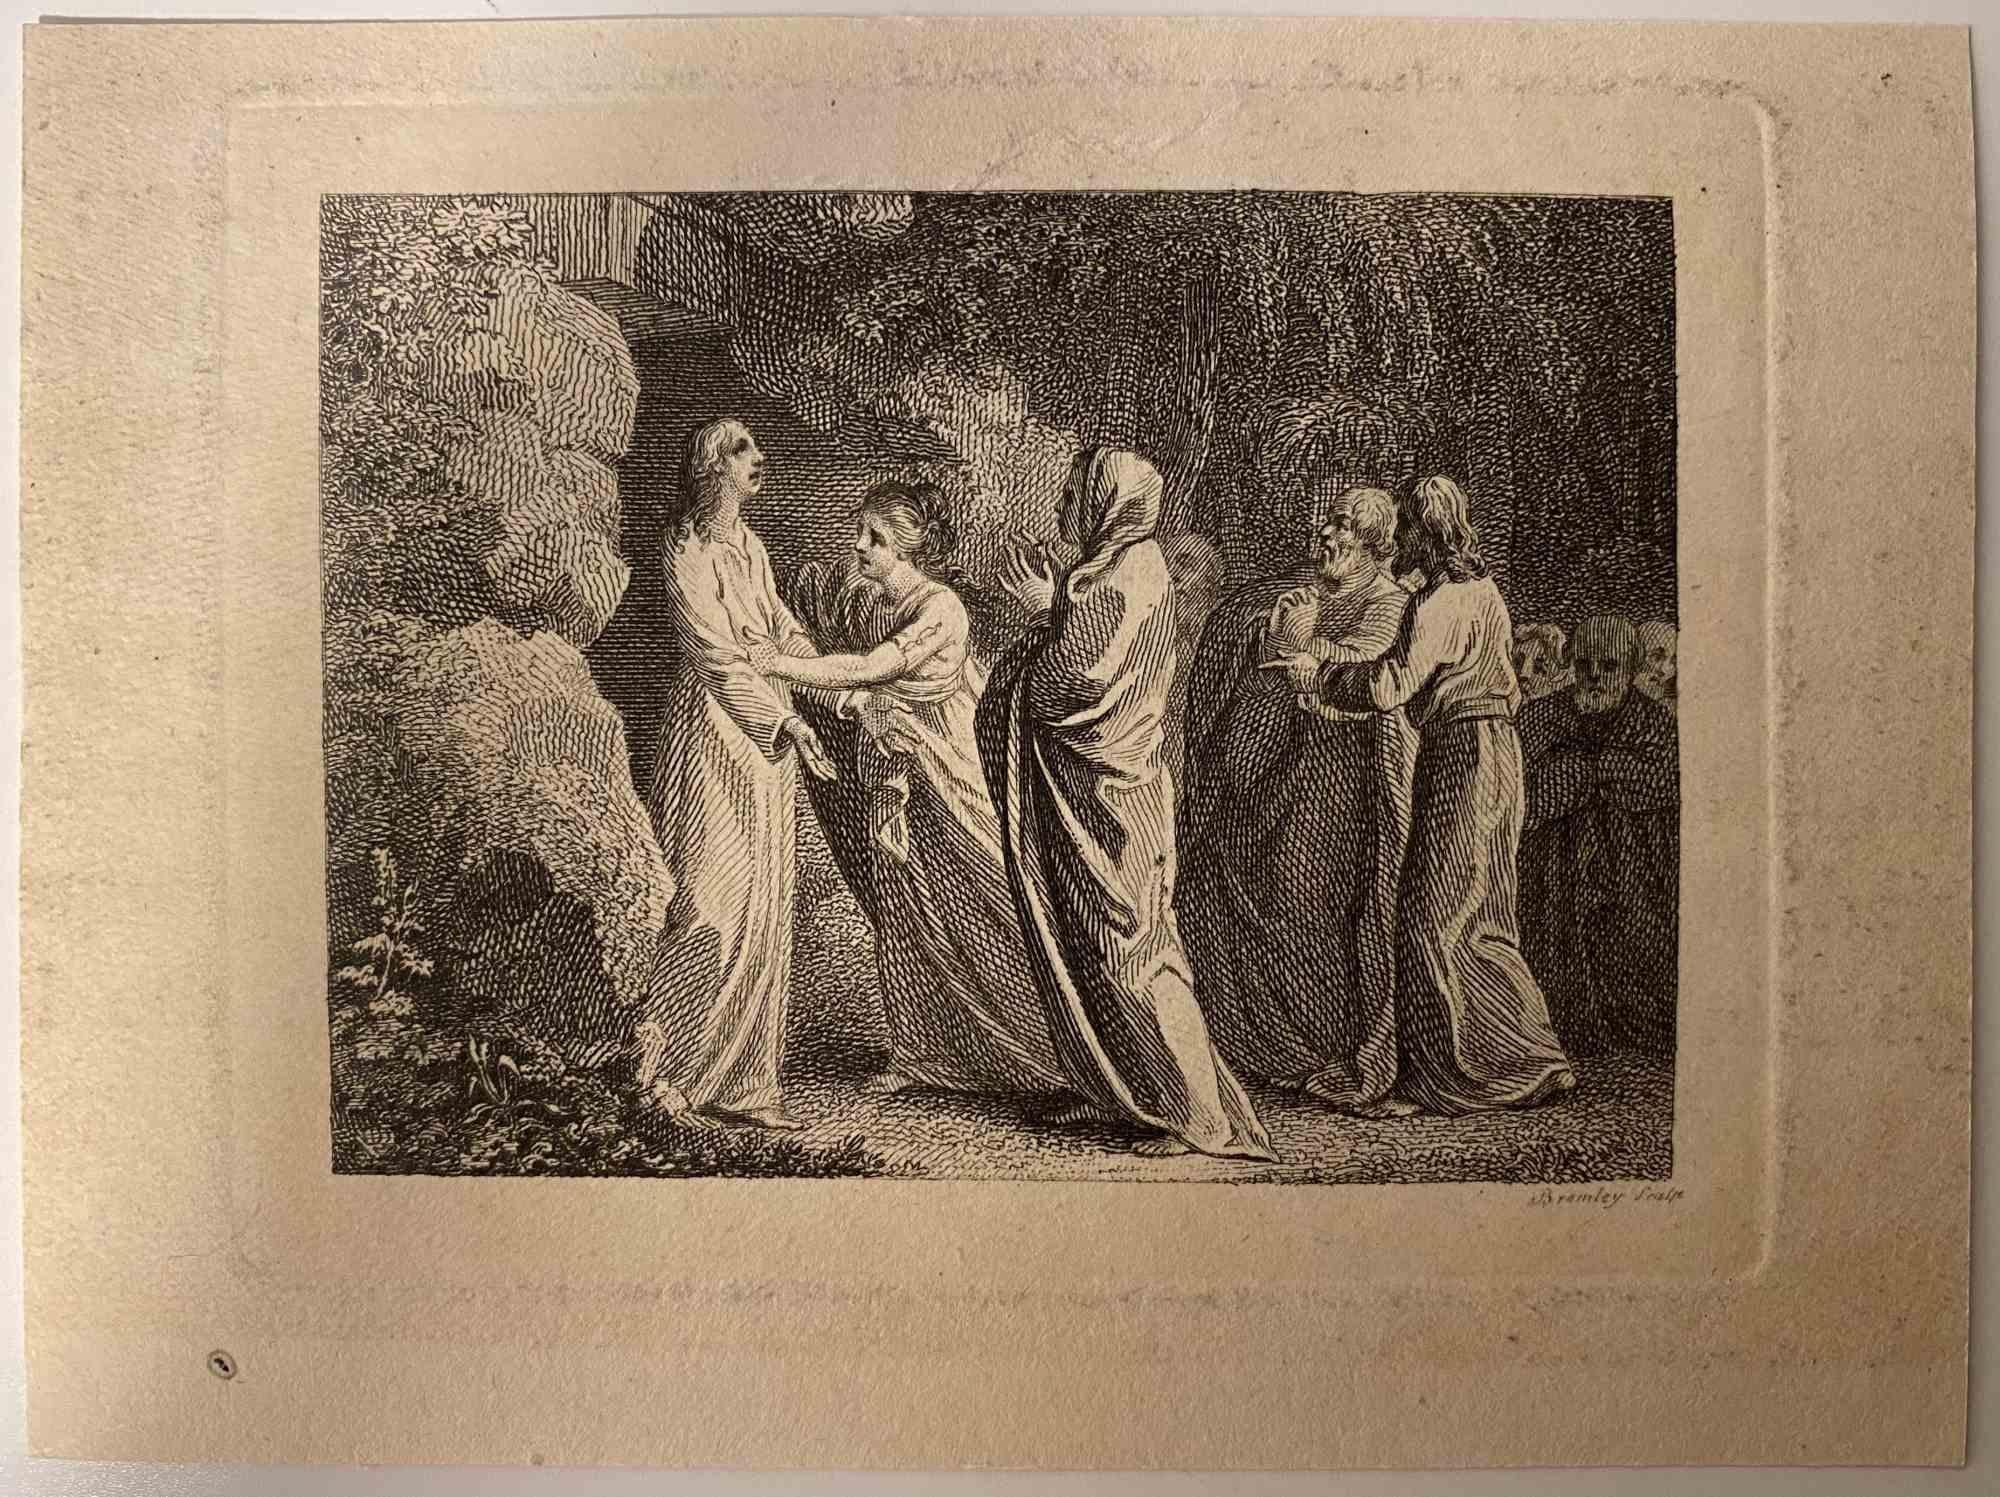 The Revelation is an original etching artwork realized by William Bromley for Johann Caspar Lavater's "Essays on Physiognomy, Designed to Promote the Knowledge and the Love of Mankind", London, Bensley, 1810. 

Engraved on the lower "Bromley"

With